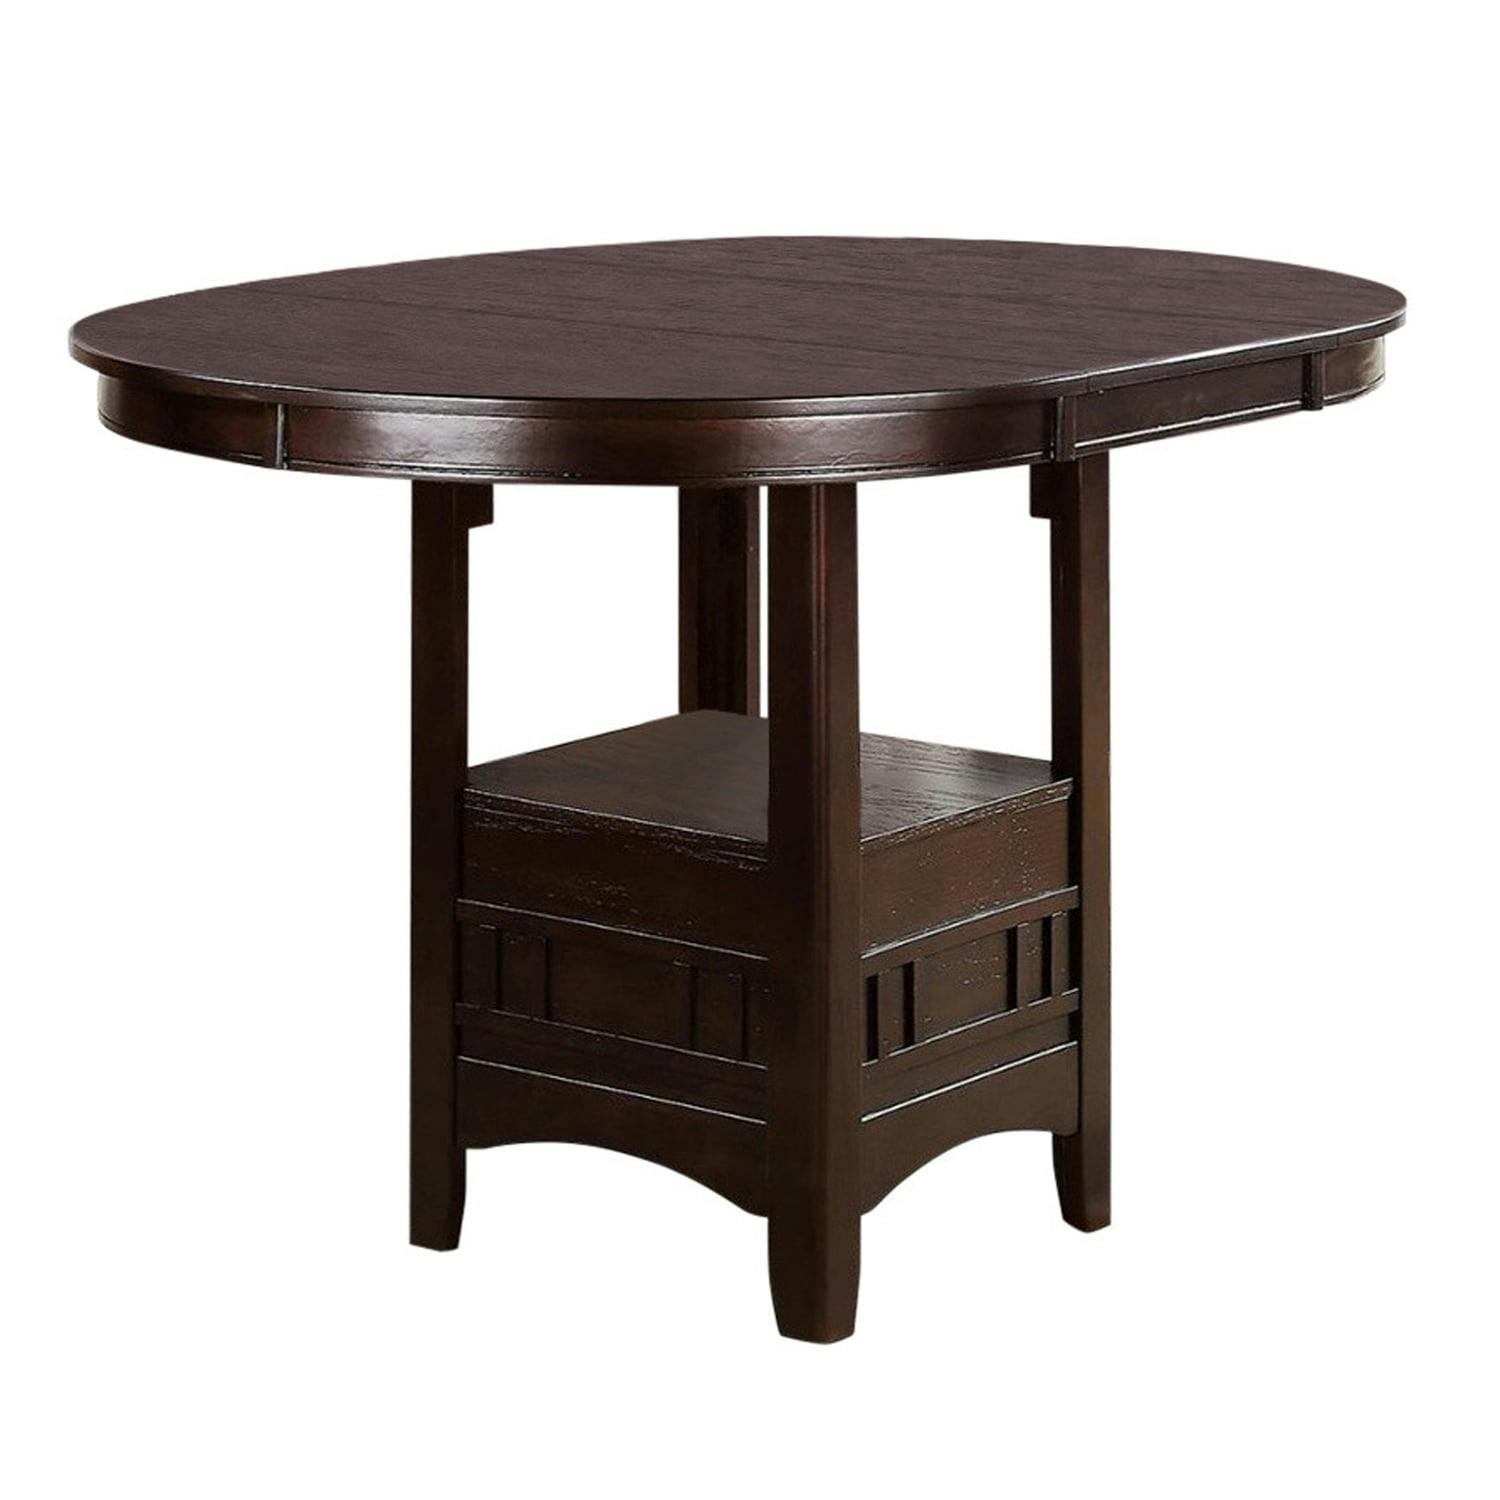 Contemporary Round Wood Extendable Counter Height Table, Brown